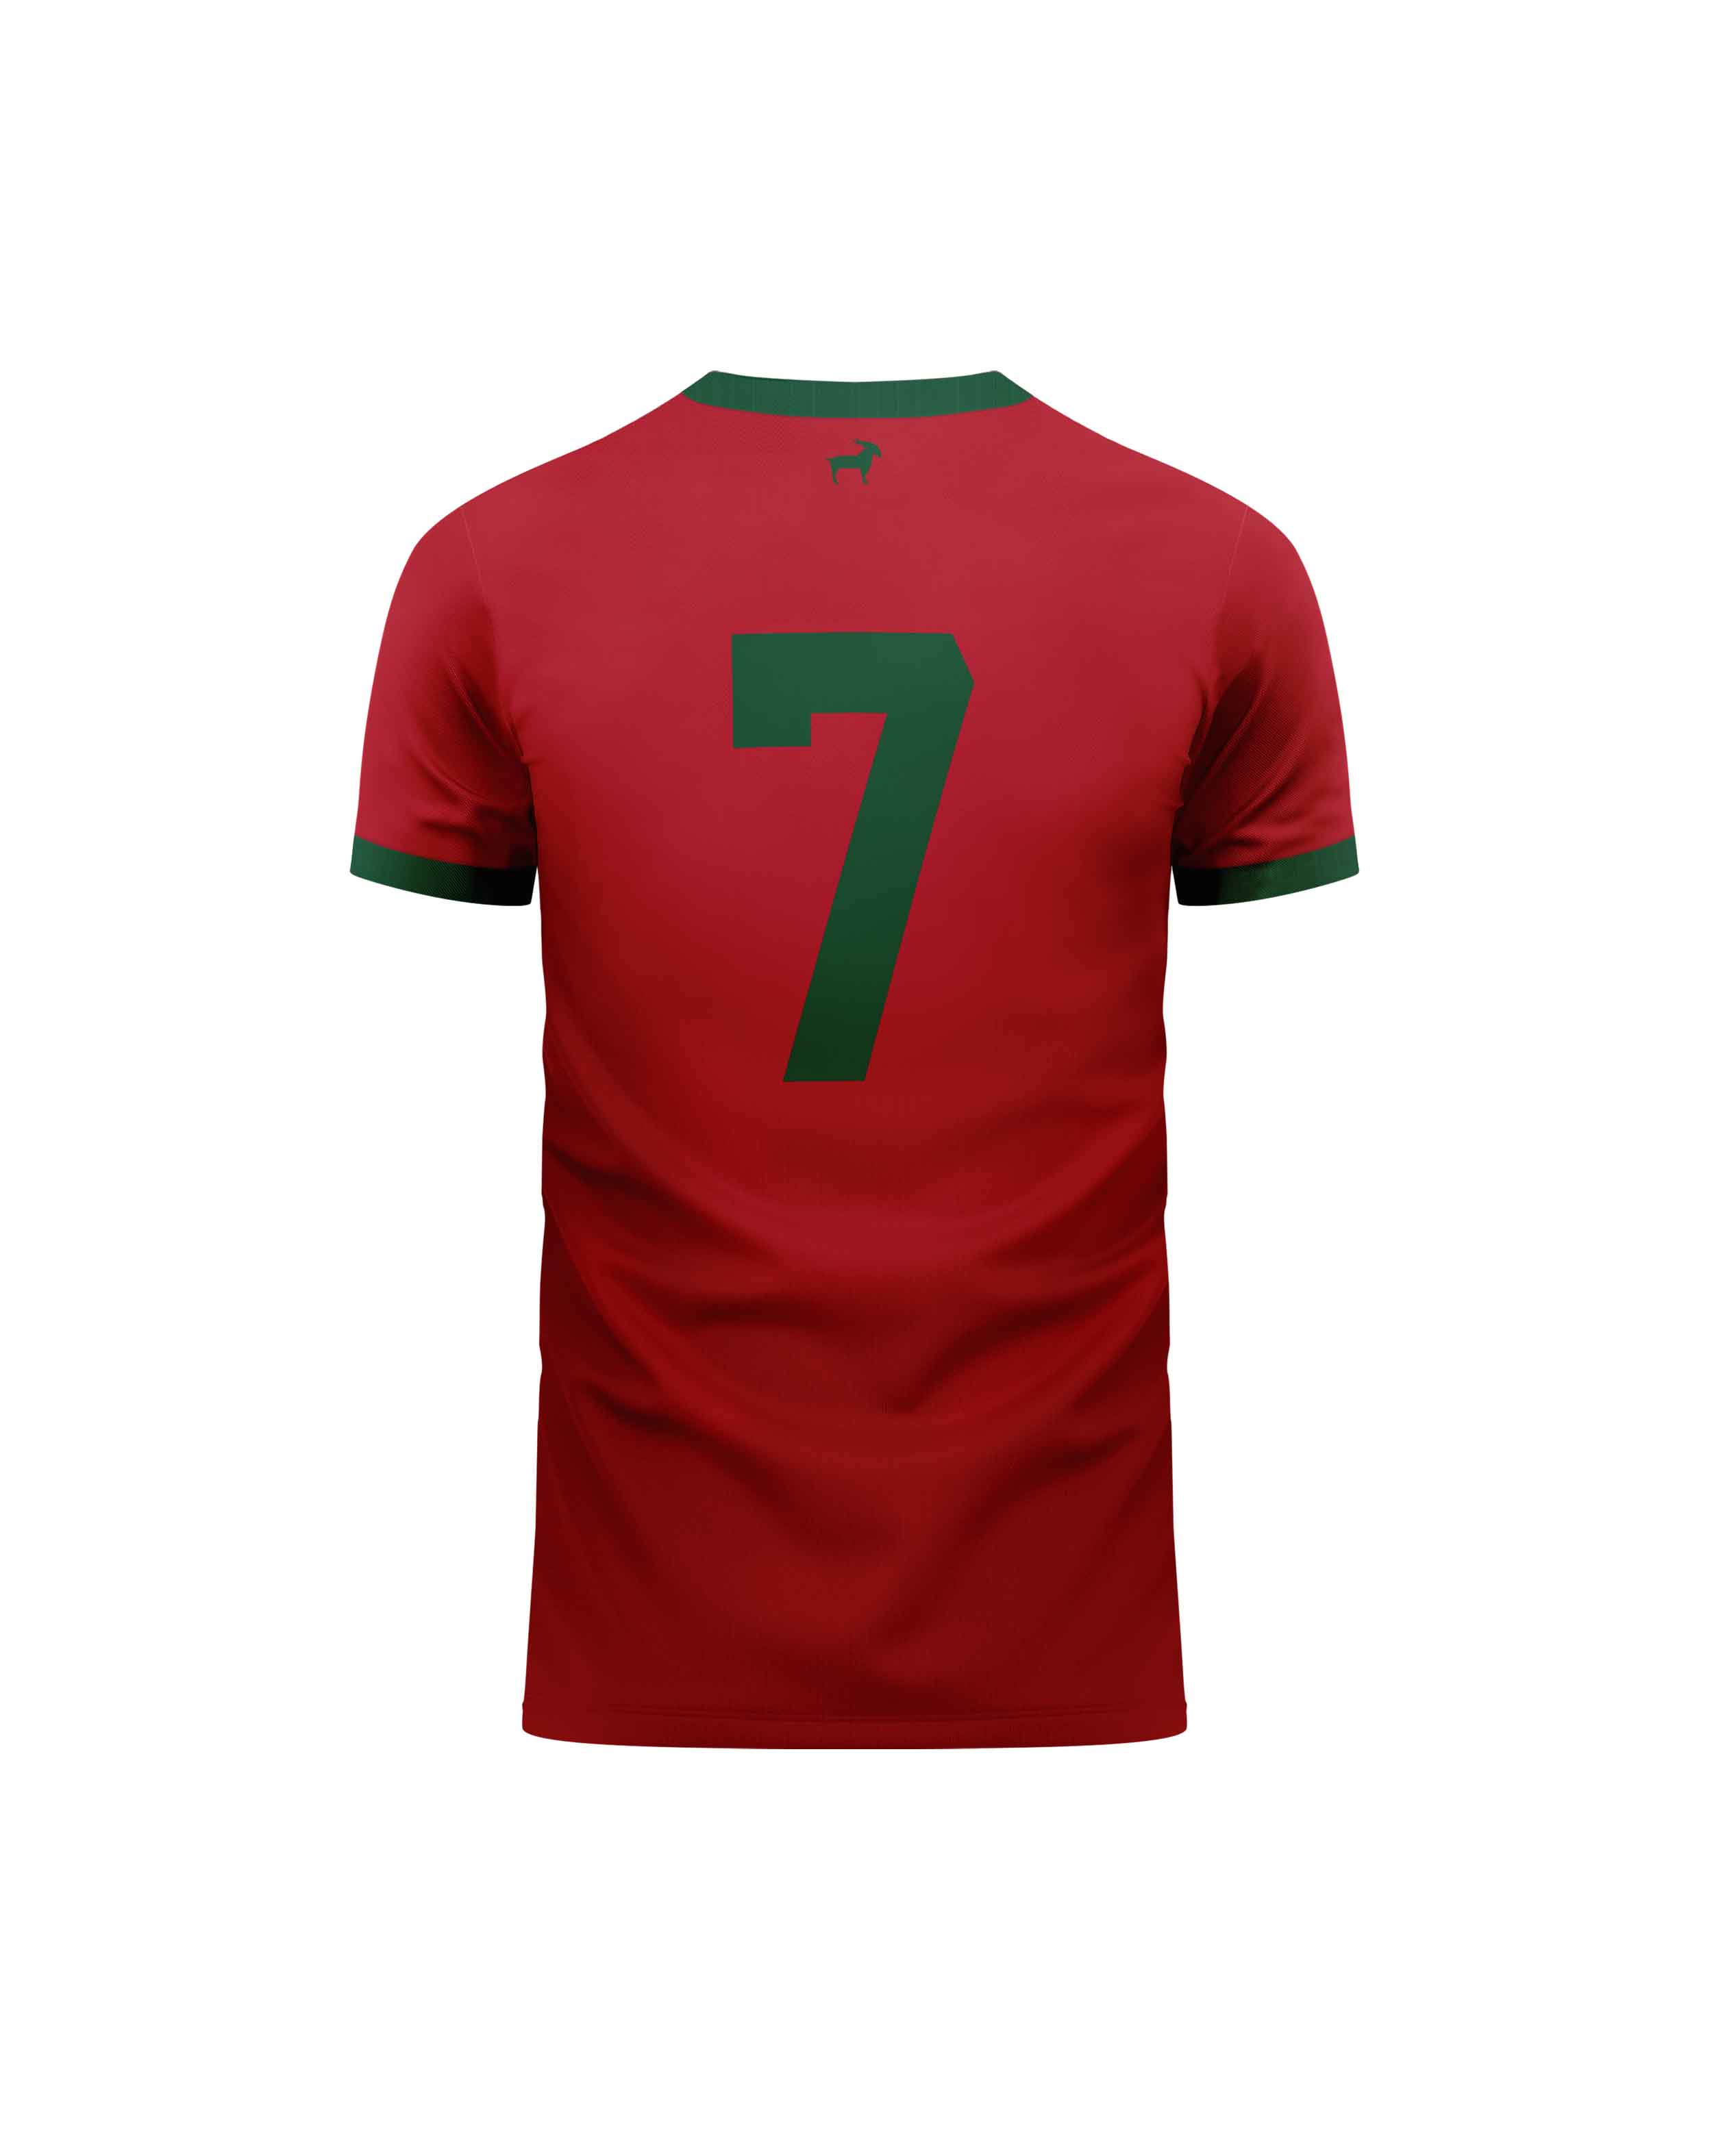 GOAT 7 Portugal SS Jersey